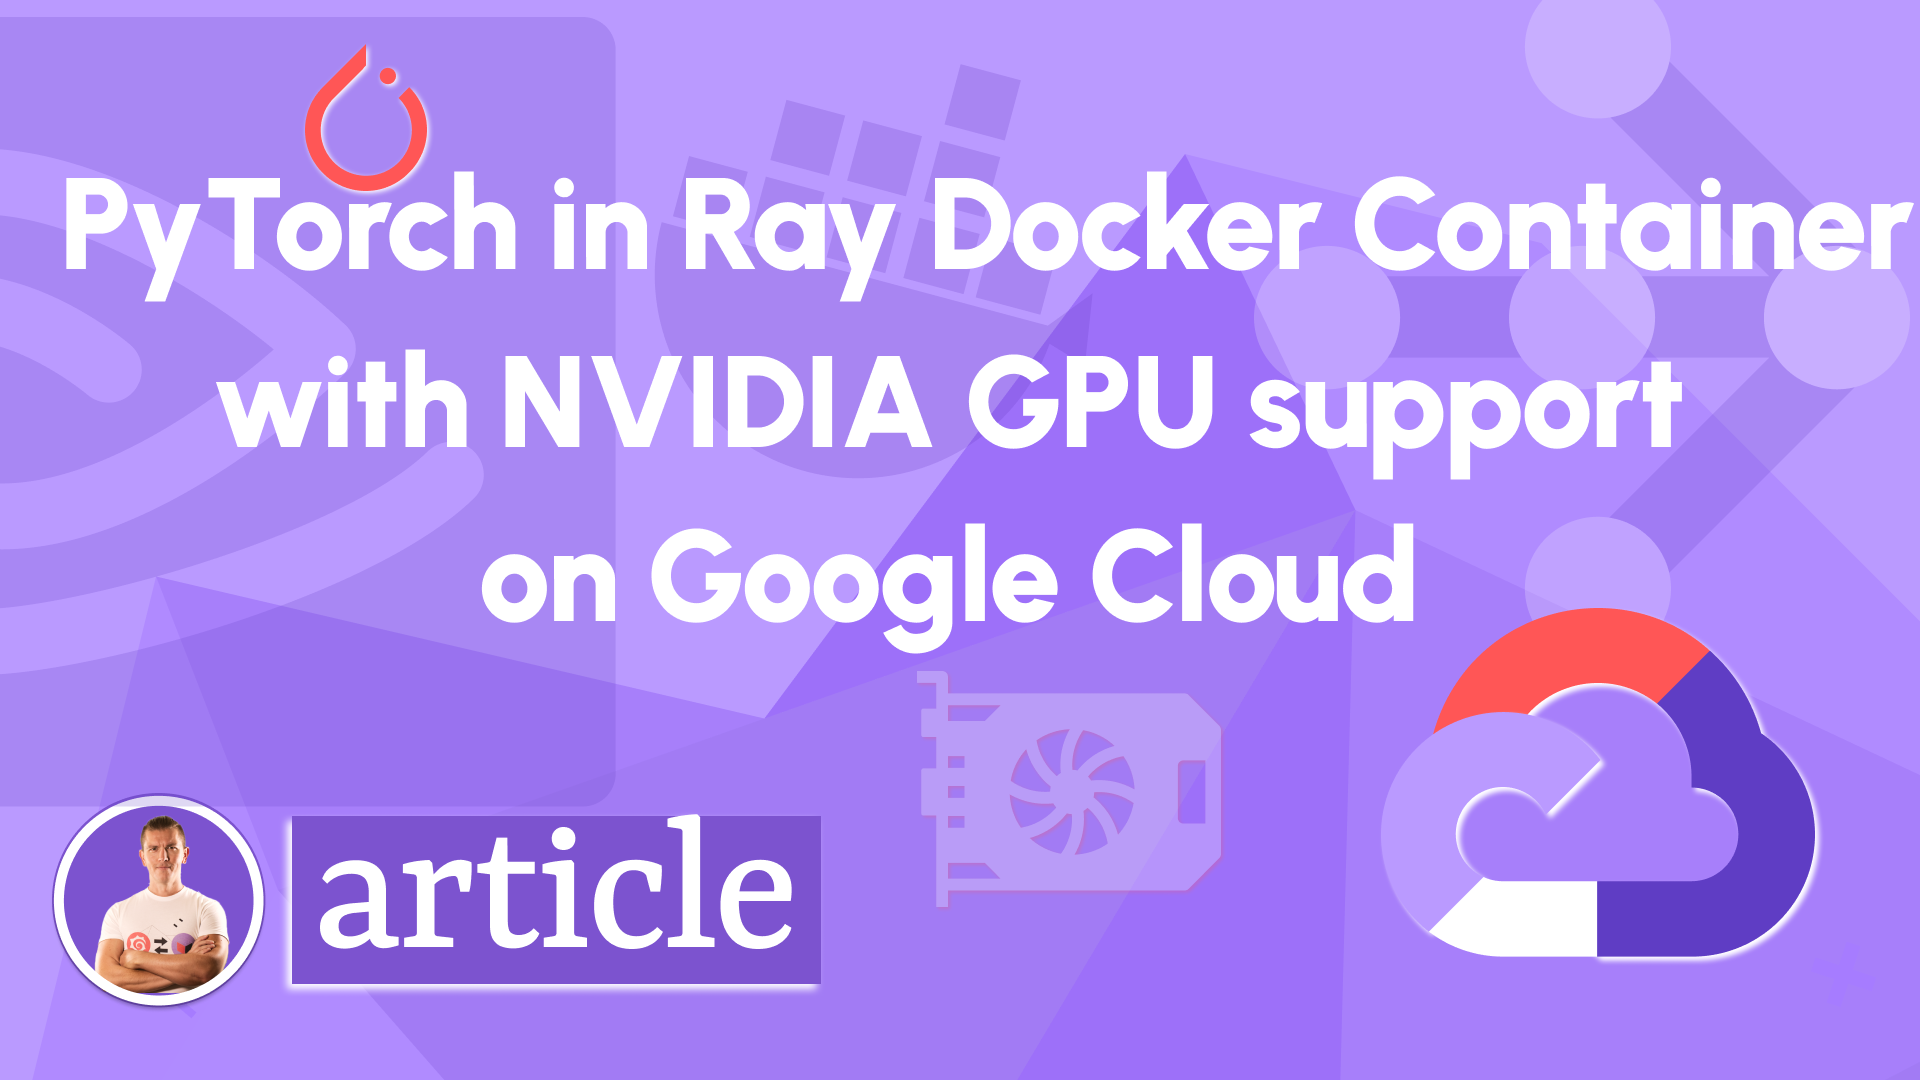 PyTorch in Ray Docker container with NVIDIA GPU support on Google Cloud